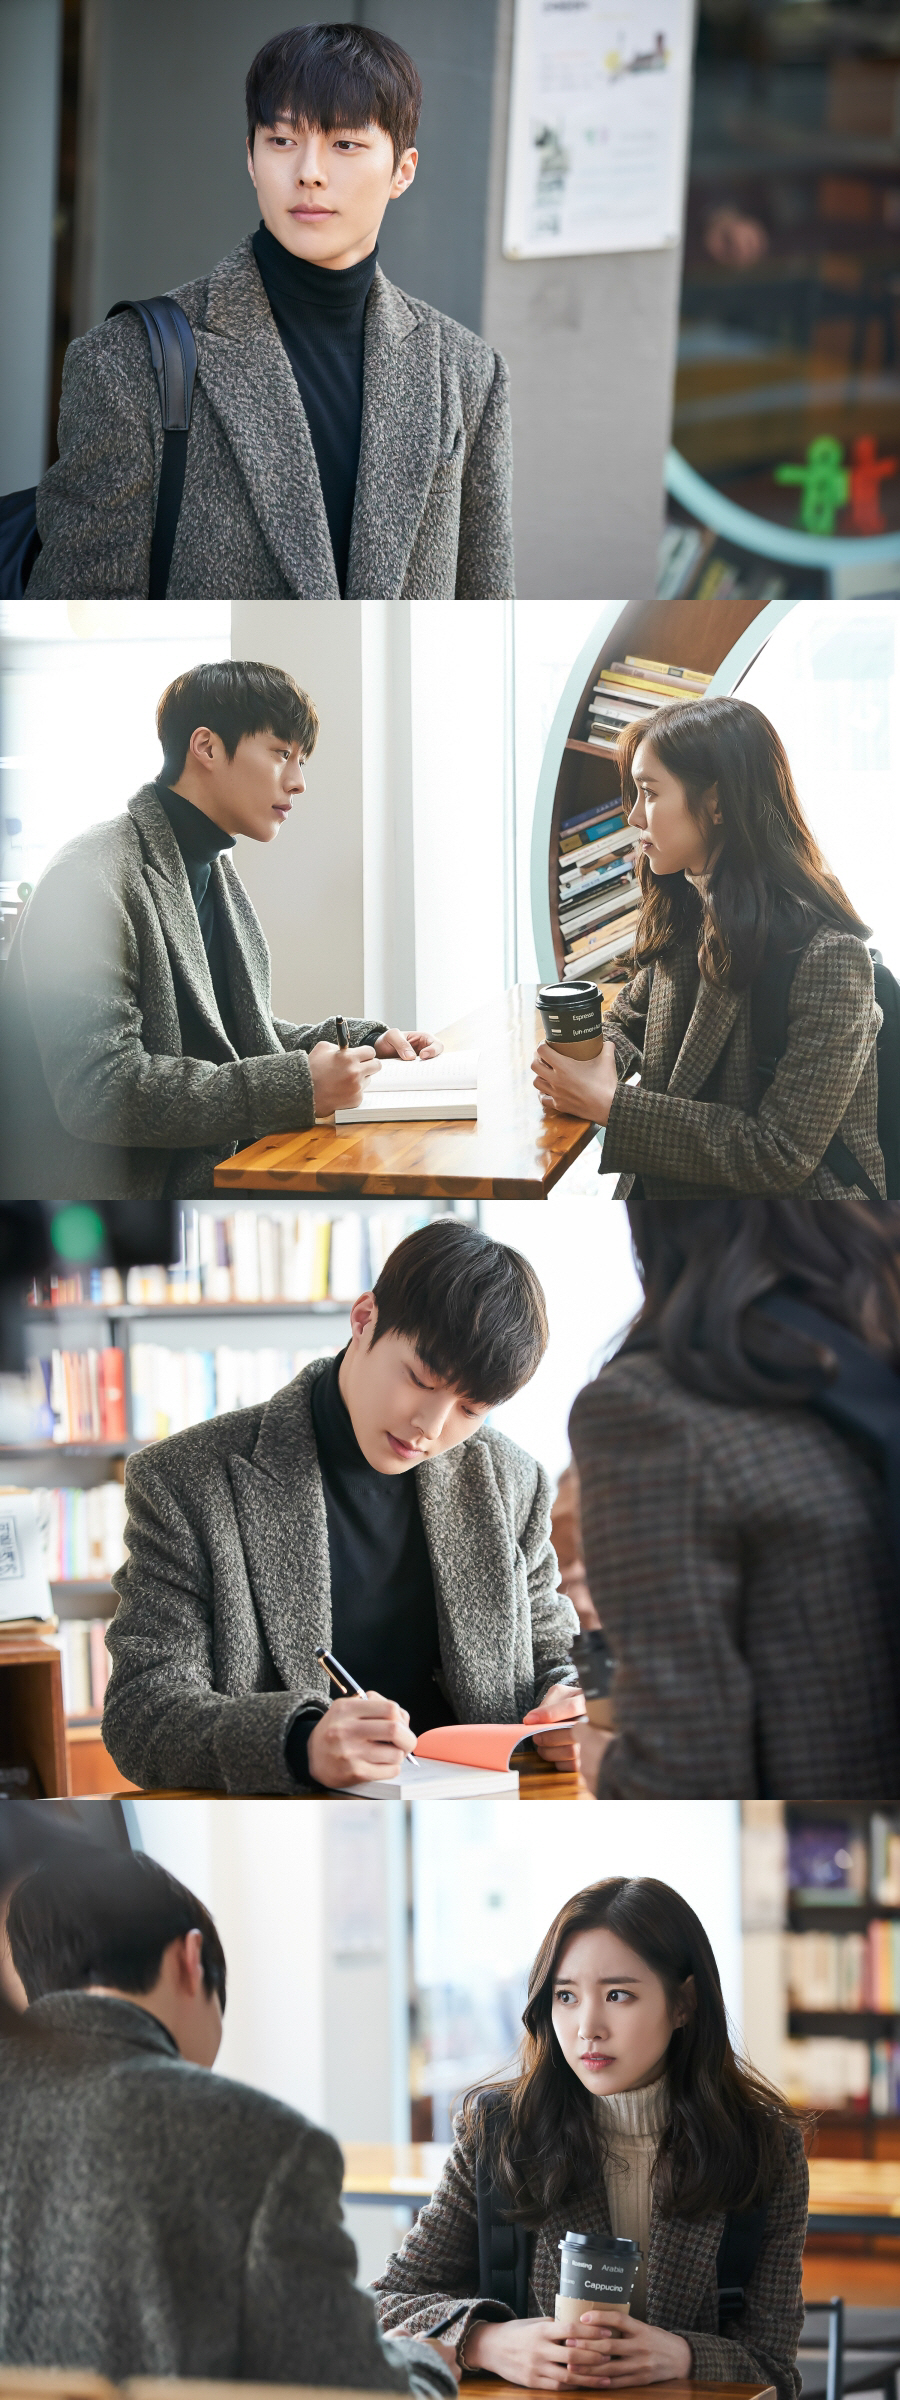 KBS 2TV new Mon-Tue drama Born Again unveiled the first meeting of Jang Ki-yong and Jin Se-yeon.KBS 2TVs new Mon-Tue drama Bone Again (played by Jung Soo-mi/directed by Jin Hyung-wook/produced UFO Productions, Monster Union) is scheduled to air on Monday night, the 20th, and will feature Jang Ki-yong (played by Gong Ji-cheol/Cheon Jong-beom), Jin Se-yeon (played by Jung Ha-eun/Intimacybin), Lee Soo-hyuk (played by Cha Hyung-bin/Kim Soo-hyuk) ) is attracting attention as a mystery romance that plays two roles, one person, across past life and present.Among them, the photo shows the fateful first meeting of Chun Jong-beom (Jang Ki-yong) and Intimacy Bin (Jin Se-yeon).The two people who have crossed the space and time of 30 years and face each other are looking at each other with a face that does not have memories of past life.There is also a strange air flowing between Chun Jong-bum, who writes something in the book, and Intimacy Bin, who looks at him with his nervous eyes holding coffee.It adds tension to whether the terrible strings that have been going on since the past life will send them any signal.Intimacy Bin is in the hands of Chun Jong-bum, although he is rushing to the news that the book he was waiting for has come in.However, Chun Jong-bum has already left his mark by engraving his handwriting in his book, and Intimacy Bin is curious about how he will react.Chun Jong-bum and Intimacy Bin, who opened the door to the present-day relationship with a book, start this meeting and start to pound the hearts of prospective viewers about what events will be stirred up.The reincarnation mystery melodrama KBS 2TV new Mon-Tue drama Bone Again will be broadcasted at 10:00 pm on Monday 20th.